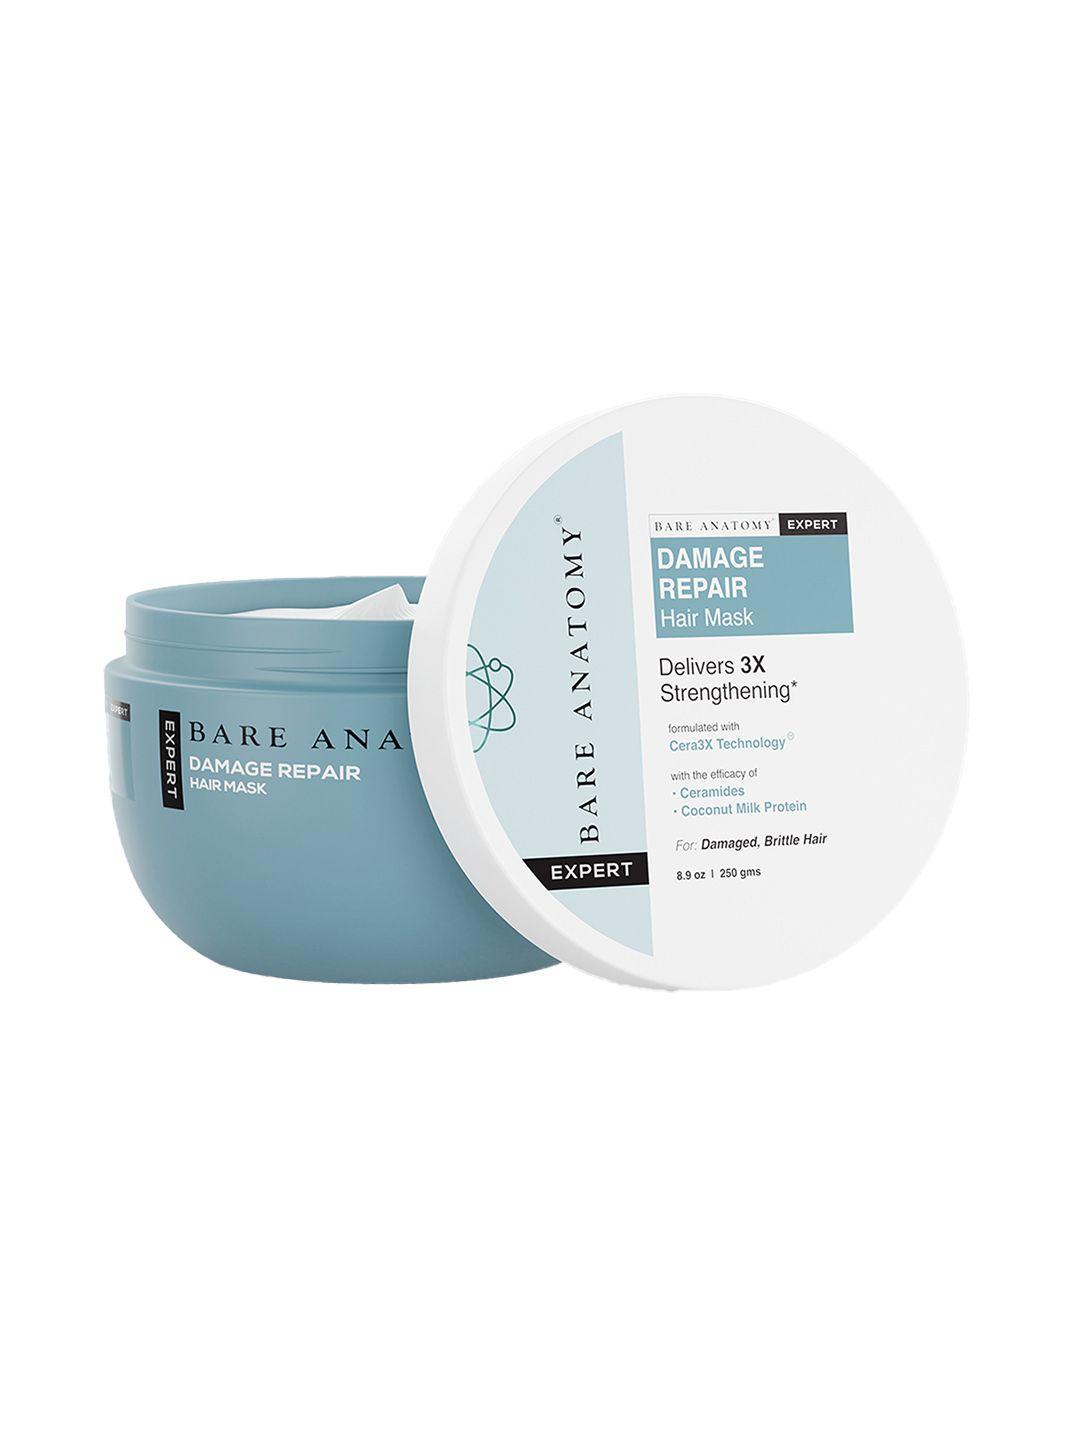 bare anatomy damage repair hair mask with ceramide a2 and coconut milk protein